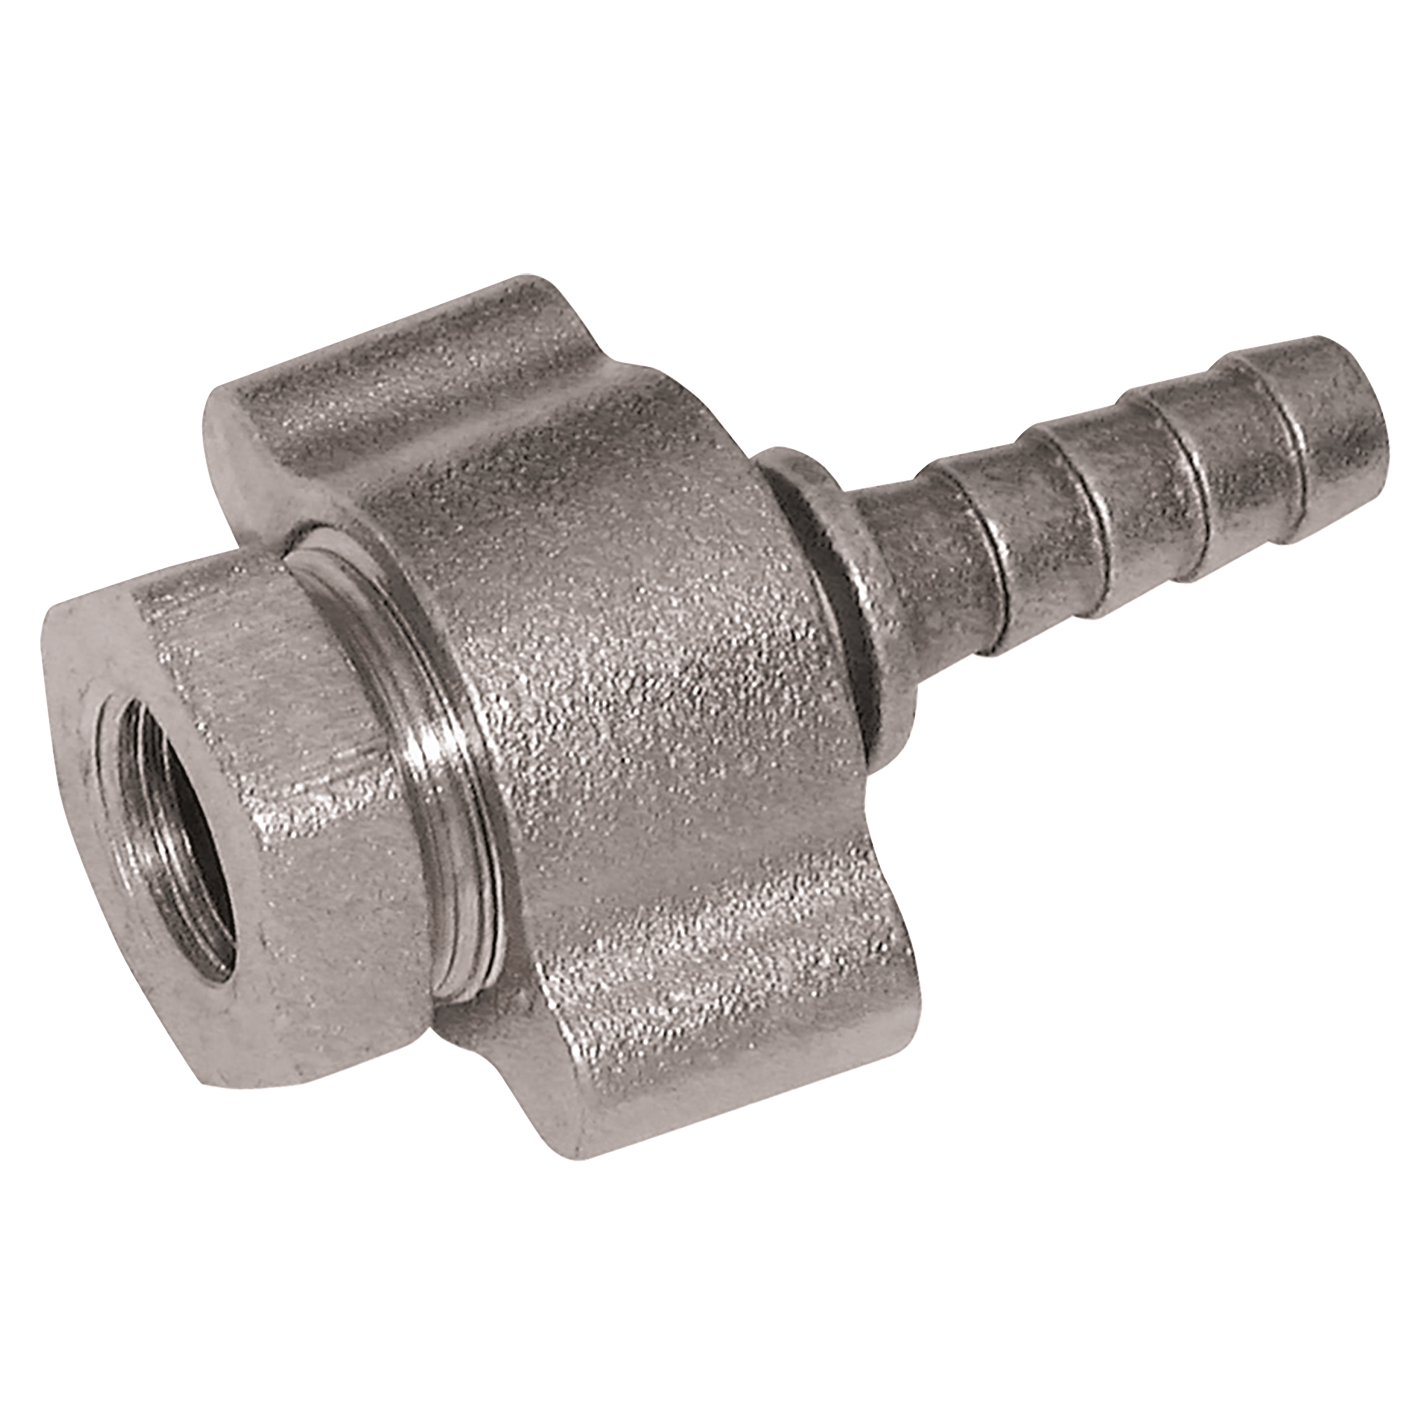 2" BSPP X 2" HT GROUND JOINT COUP